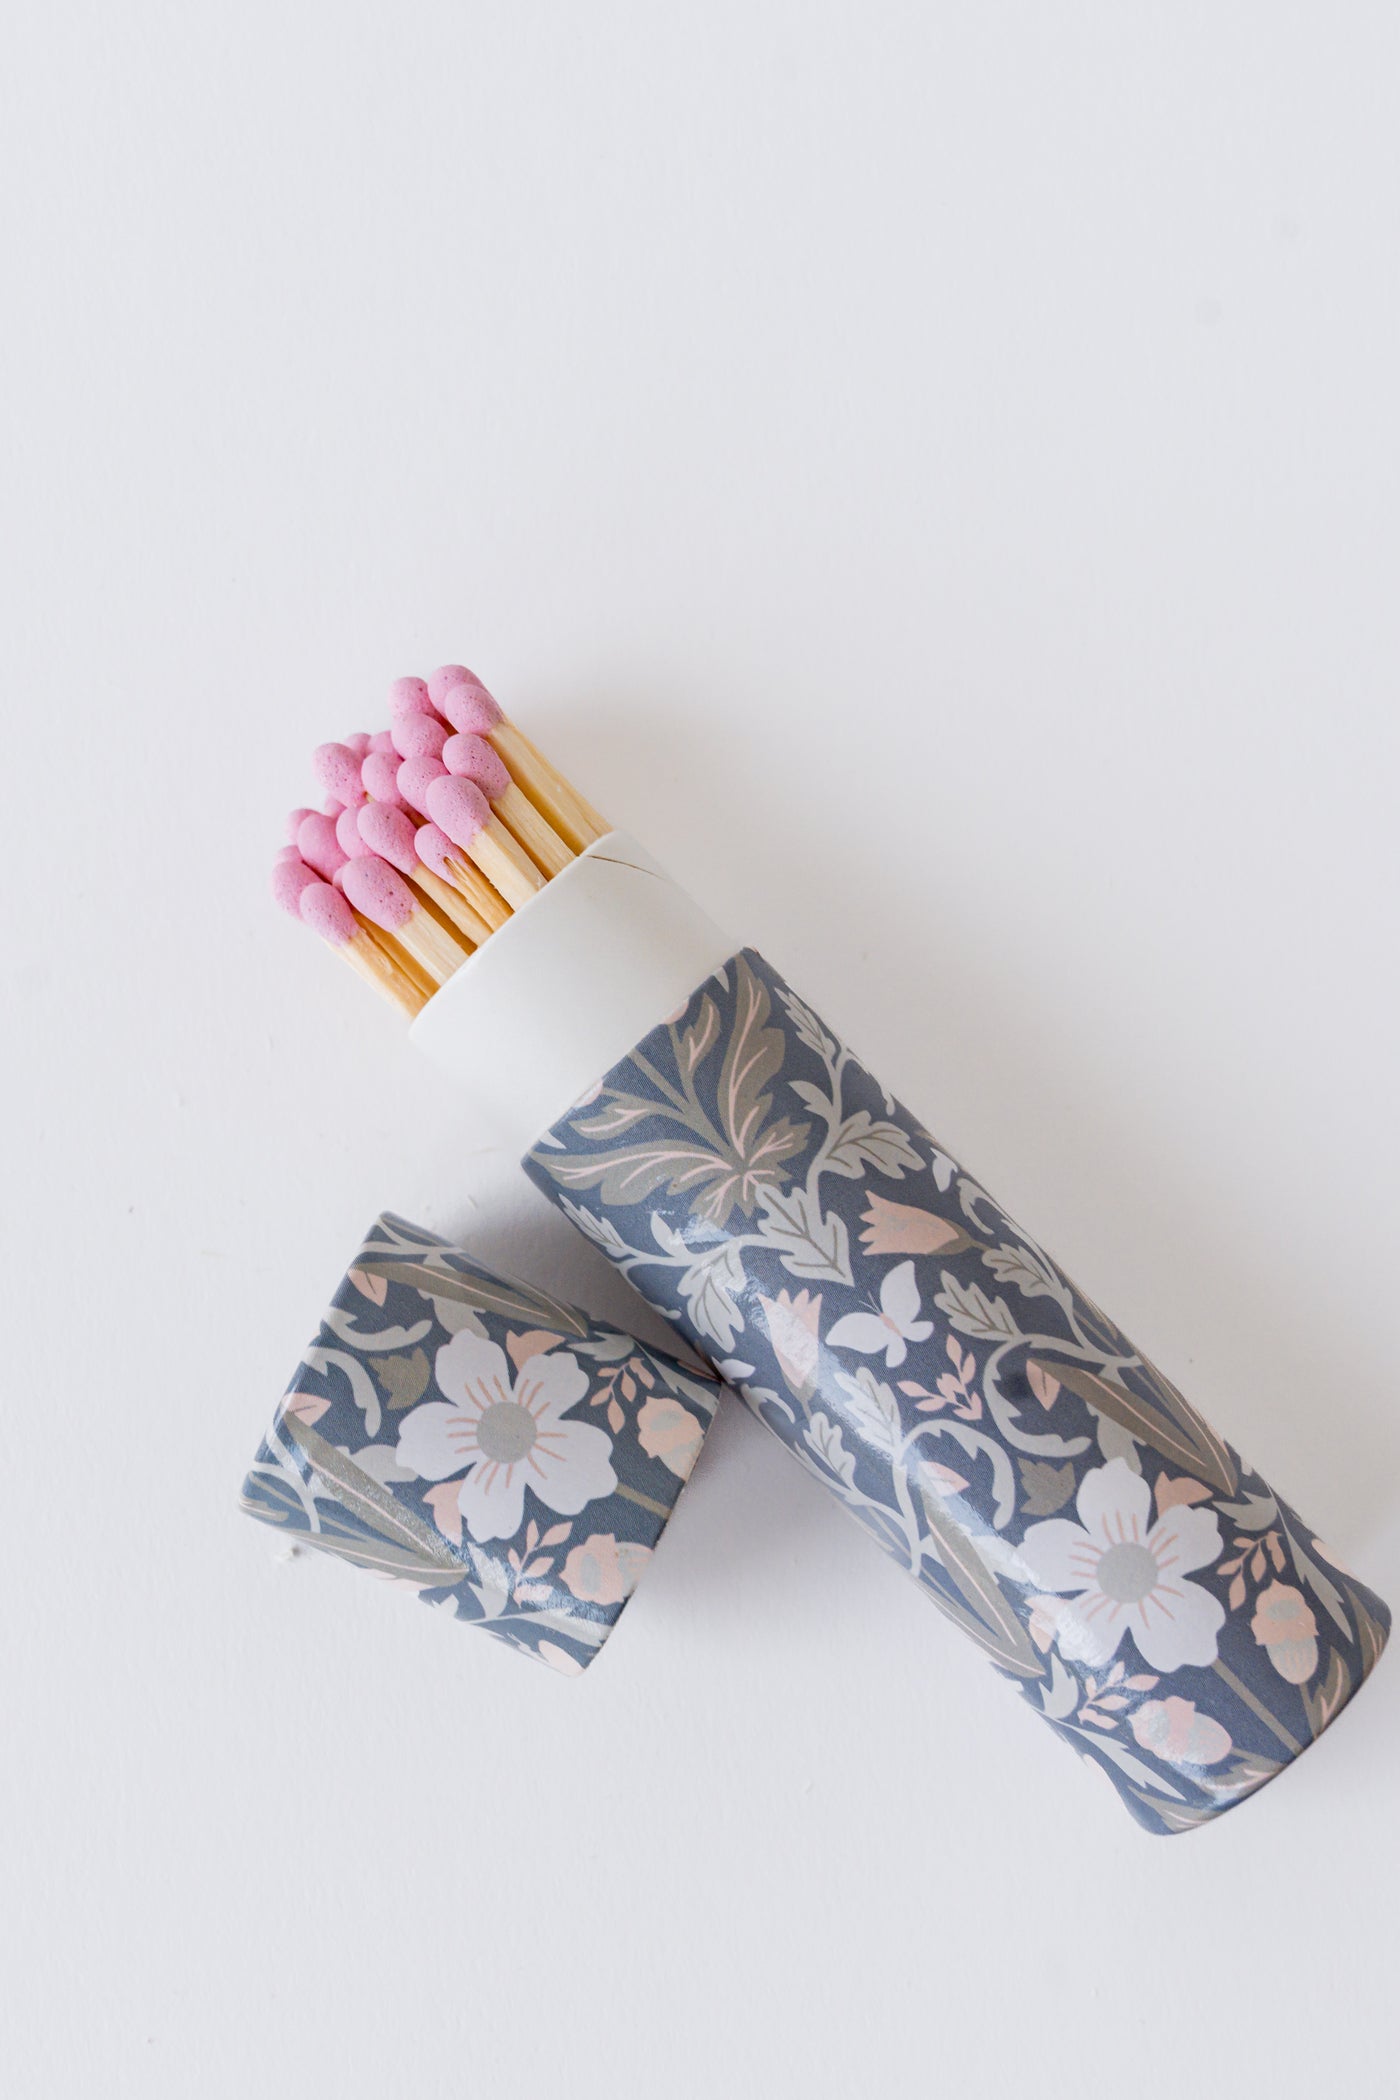 Matches in Decorative Tube